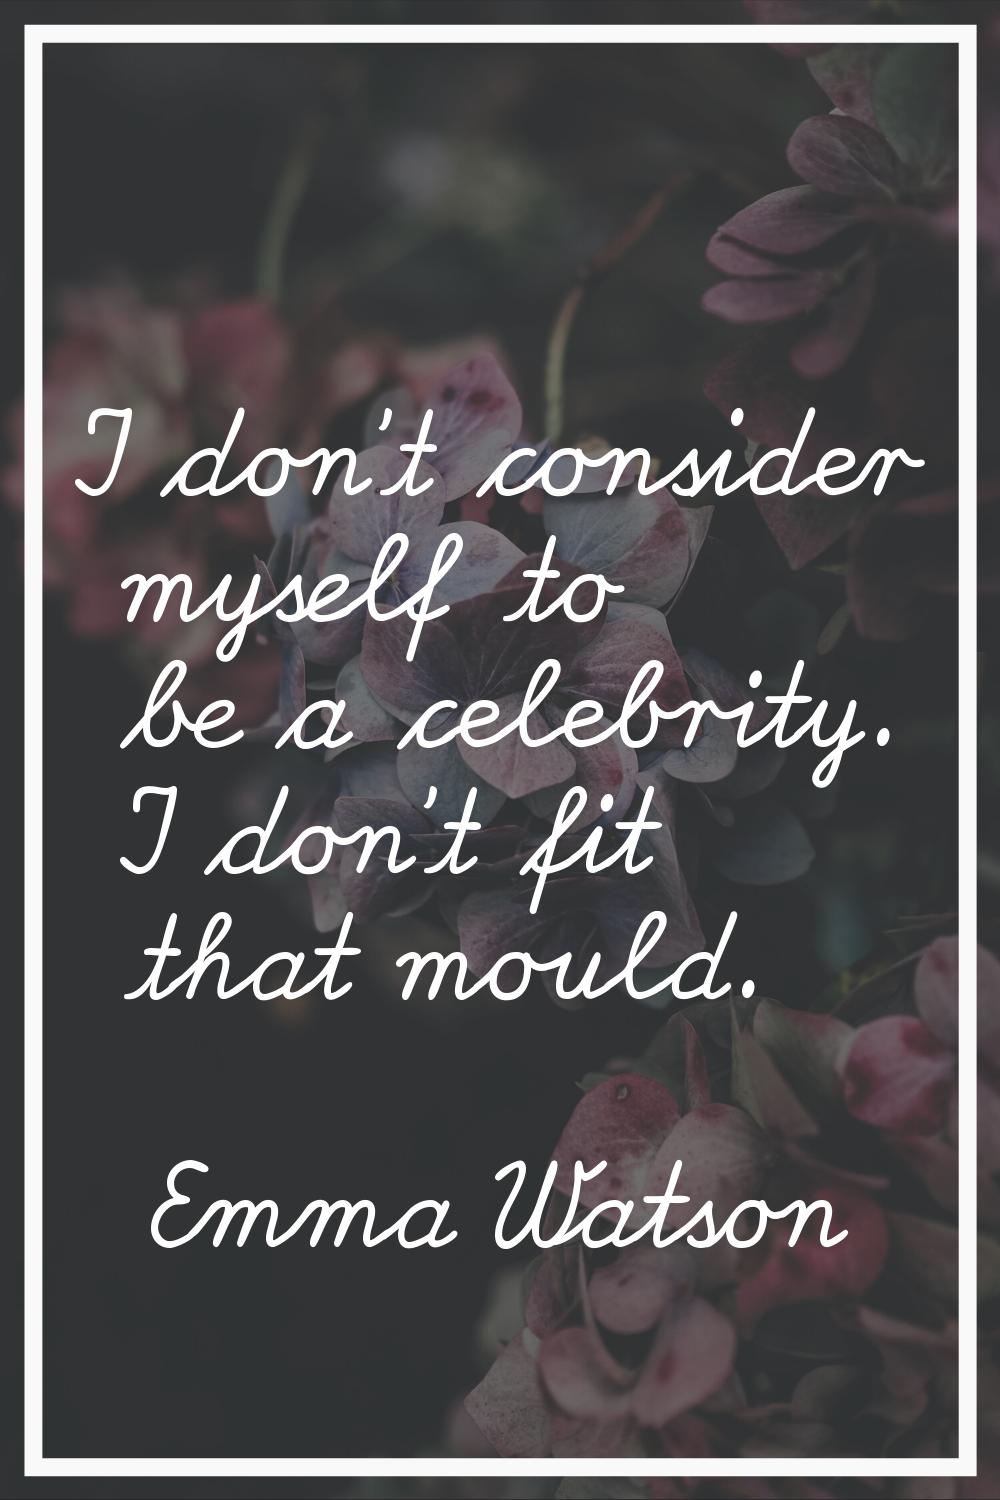 I don't consider myself to be a celebrity. I don't fit that mould.